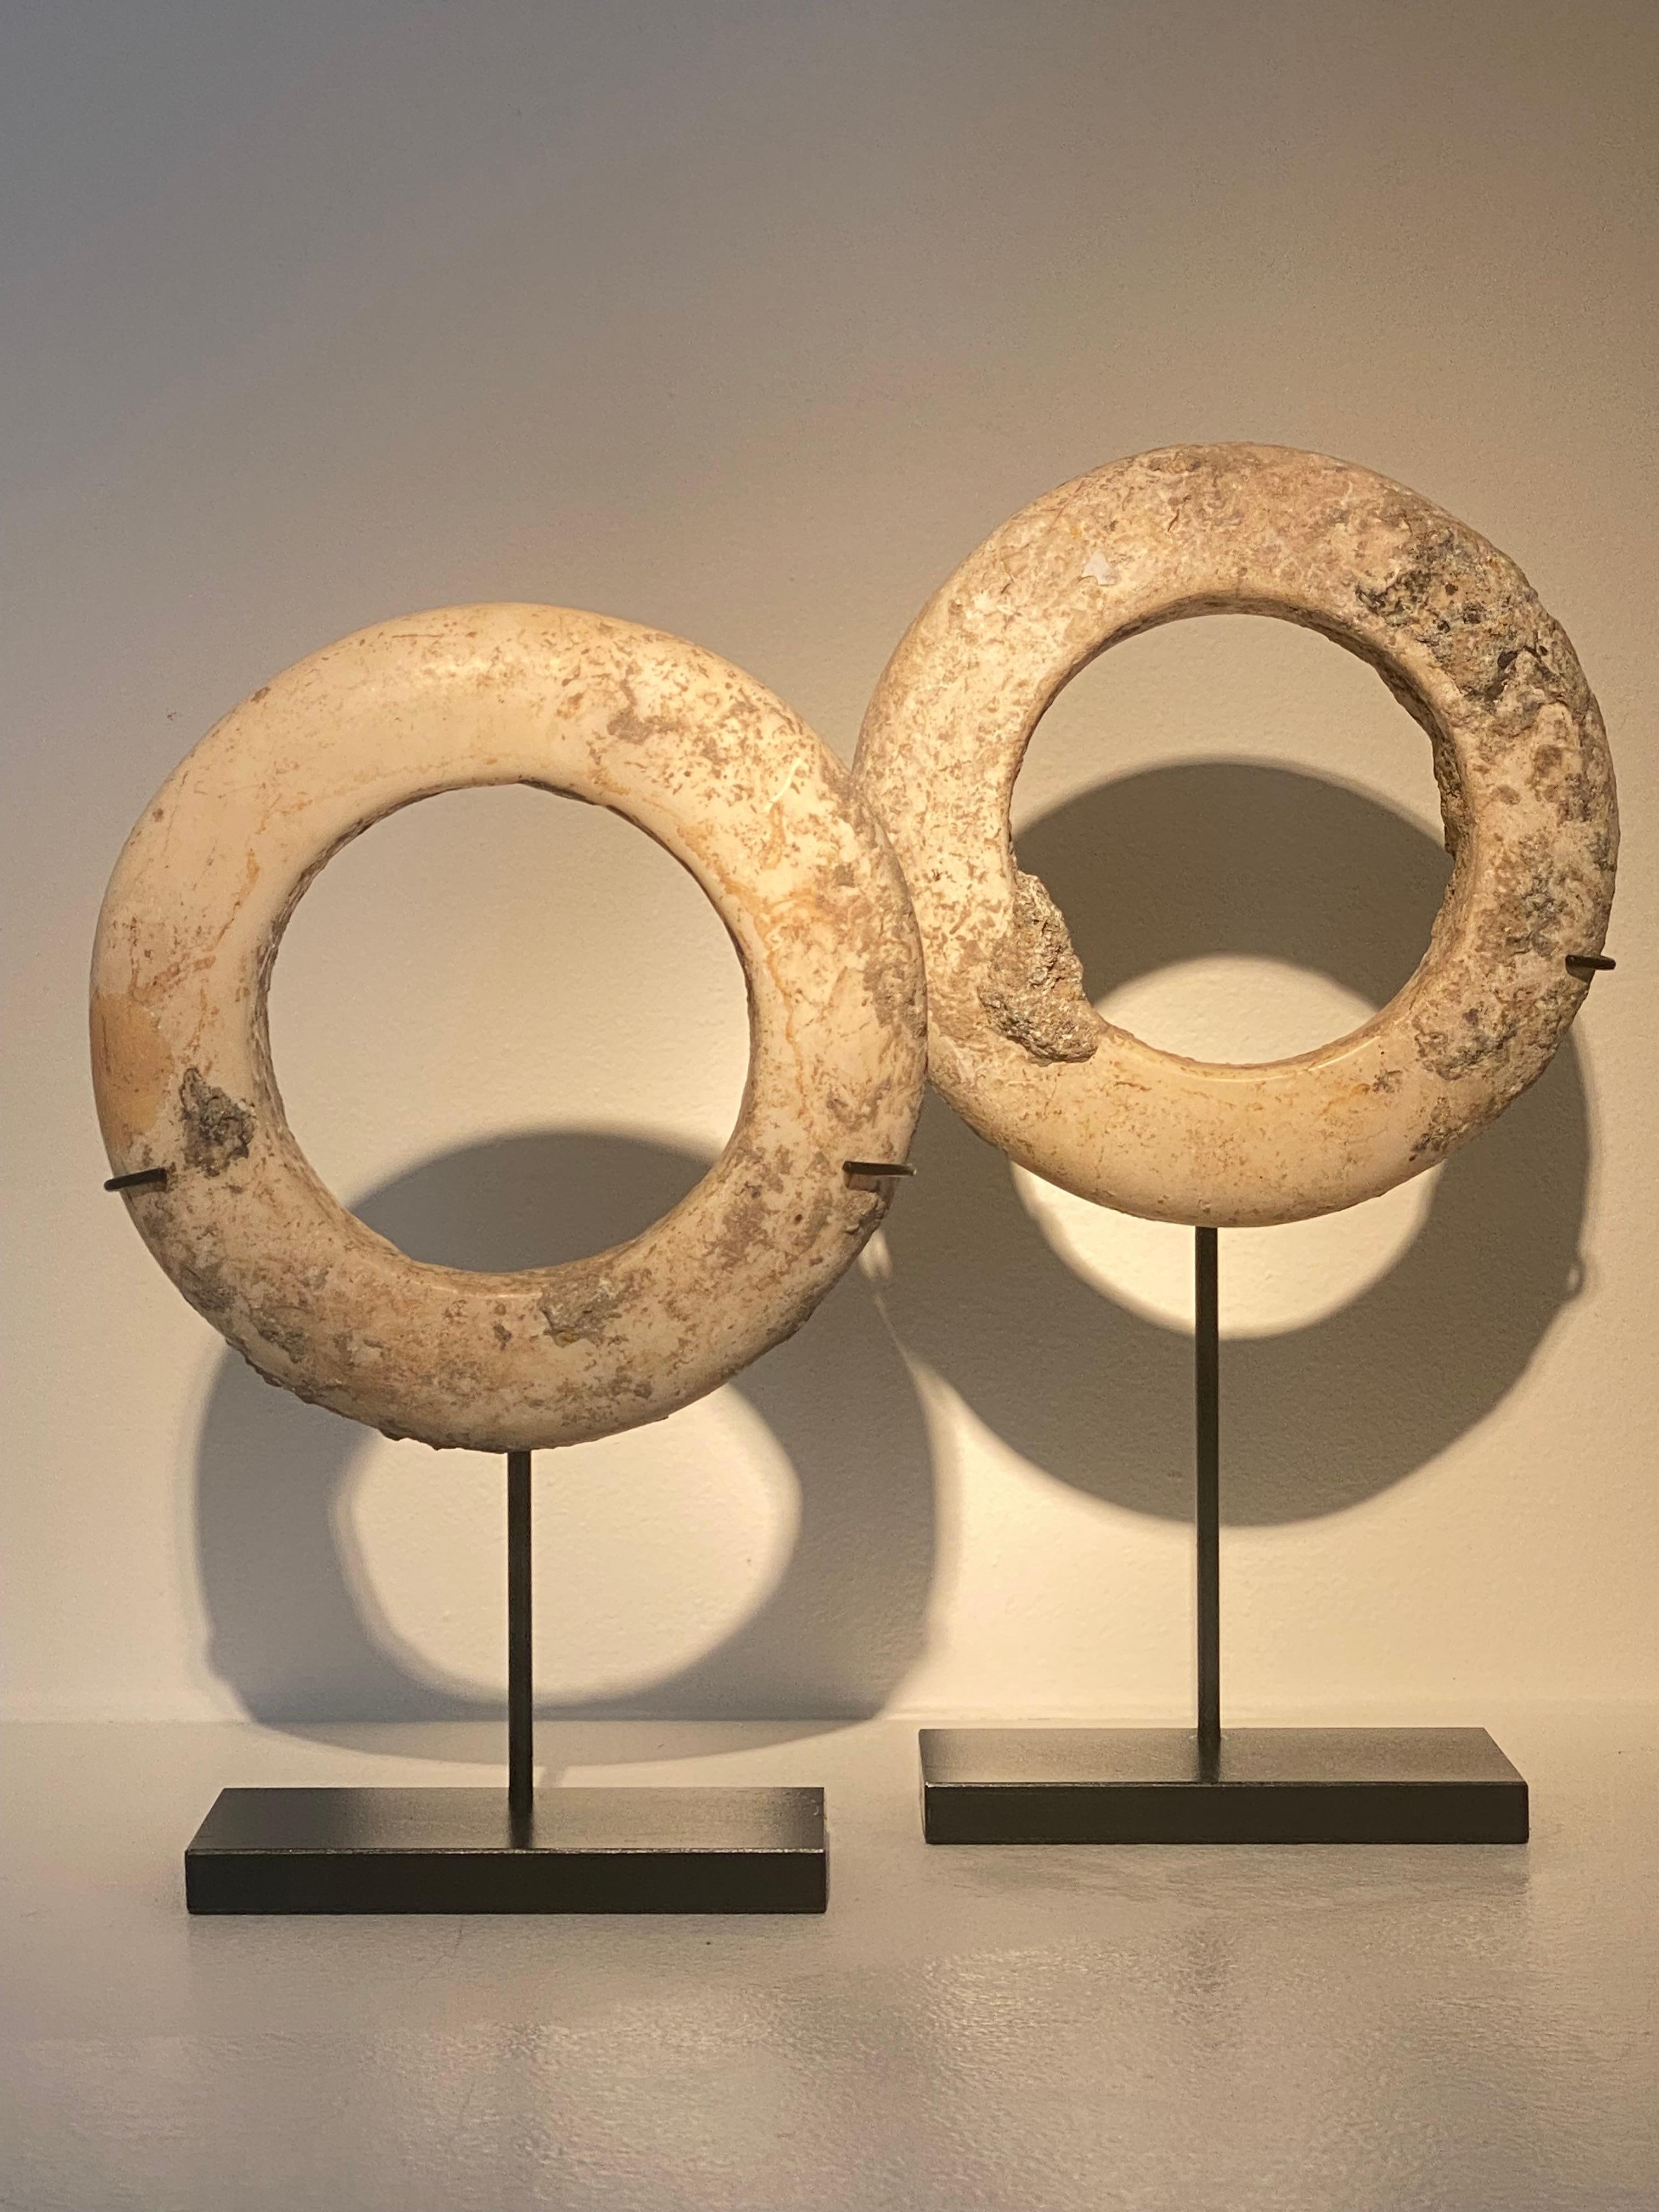 An exceptional pair of South-East-Asian Bracelets made of Shell,
from the Thailand Region , Bang Chiang Period,
prehistoric period,5000-7000 years old,
the hand-carved bracelets have a beautiful and aged patina,
they have also a smooth and round